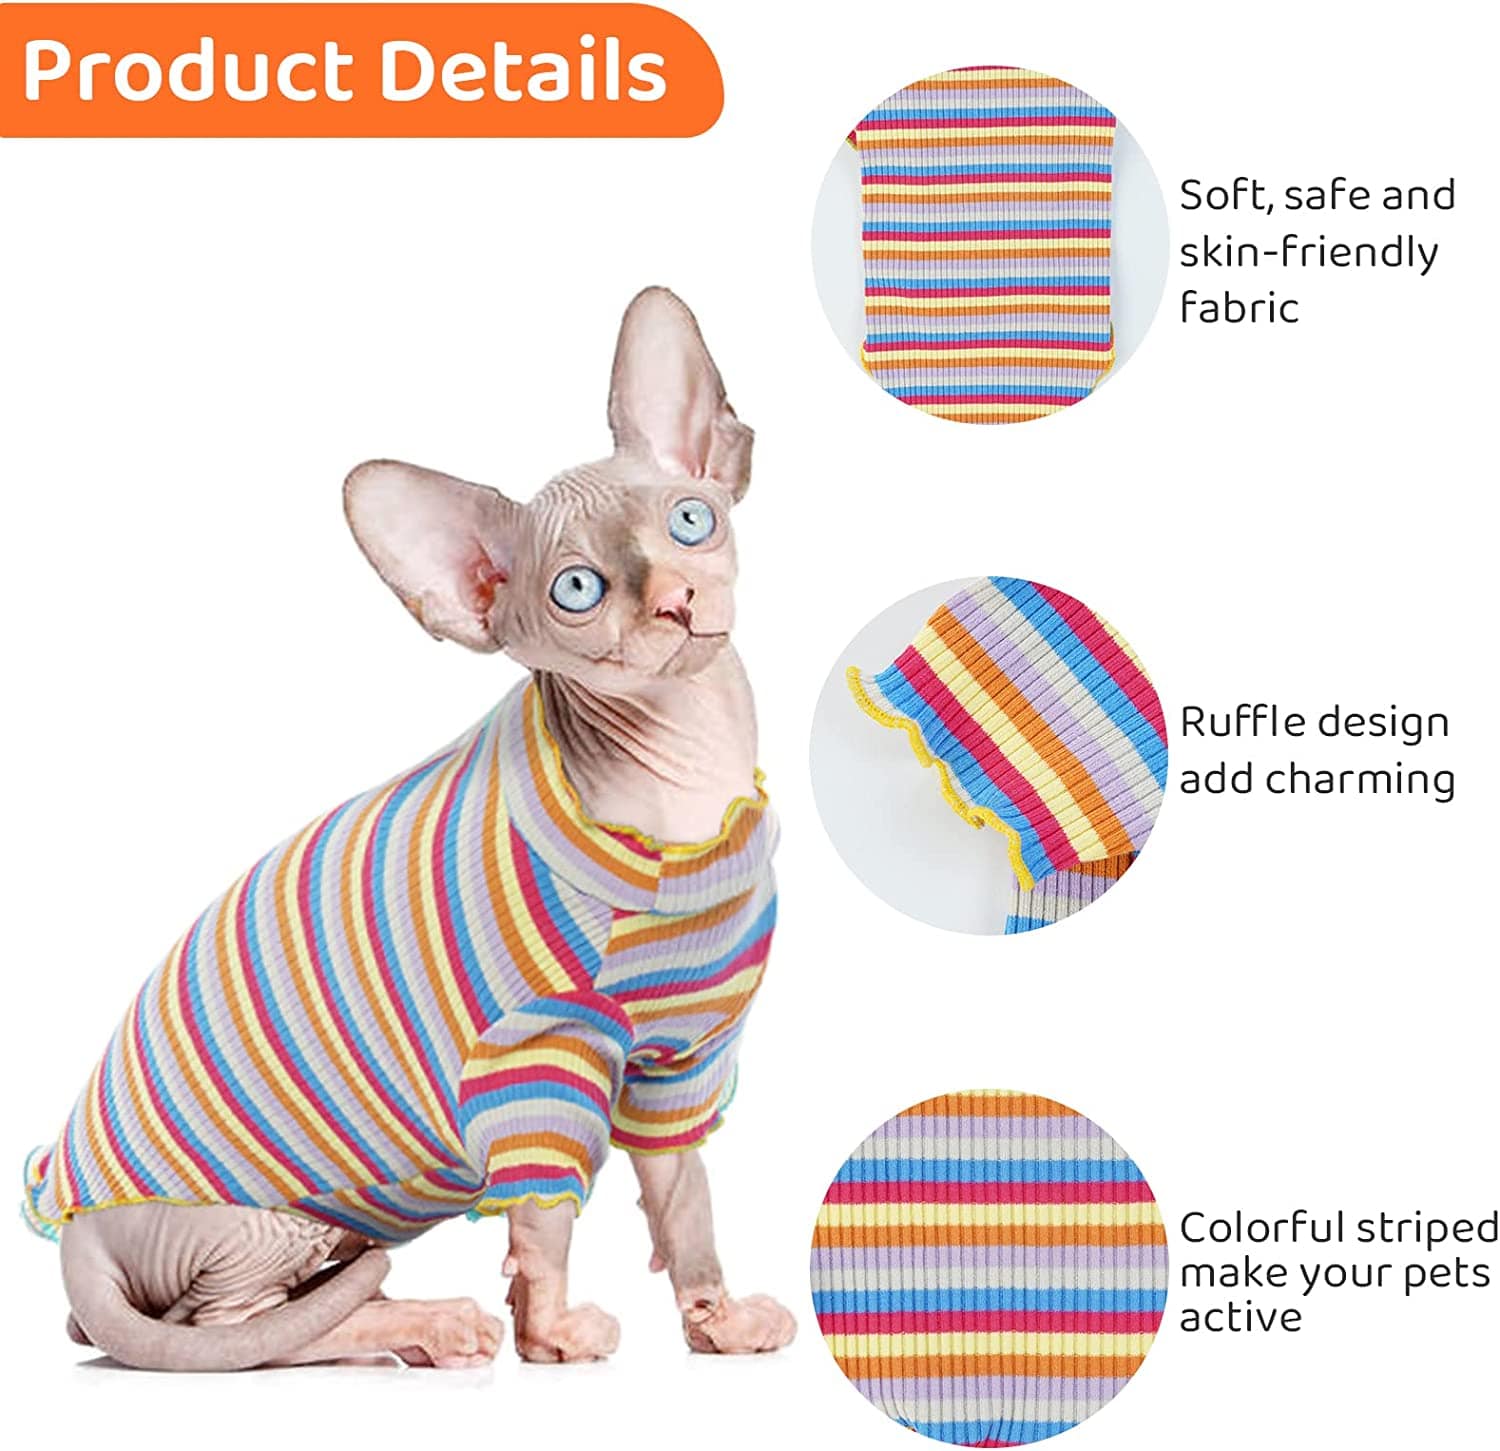 KUTKUT Dog Shirt, Pet Stretchable T-Shirt Clothes Apparel for Small Dog Cat, Sleeved Soft Breathable Sweatshirt Cute Pullover Knitwear Striped Basic Classic Tee Spring Summer Autumn - kutkuts